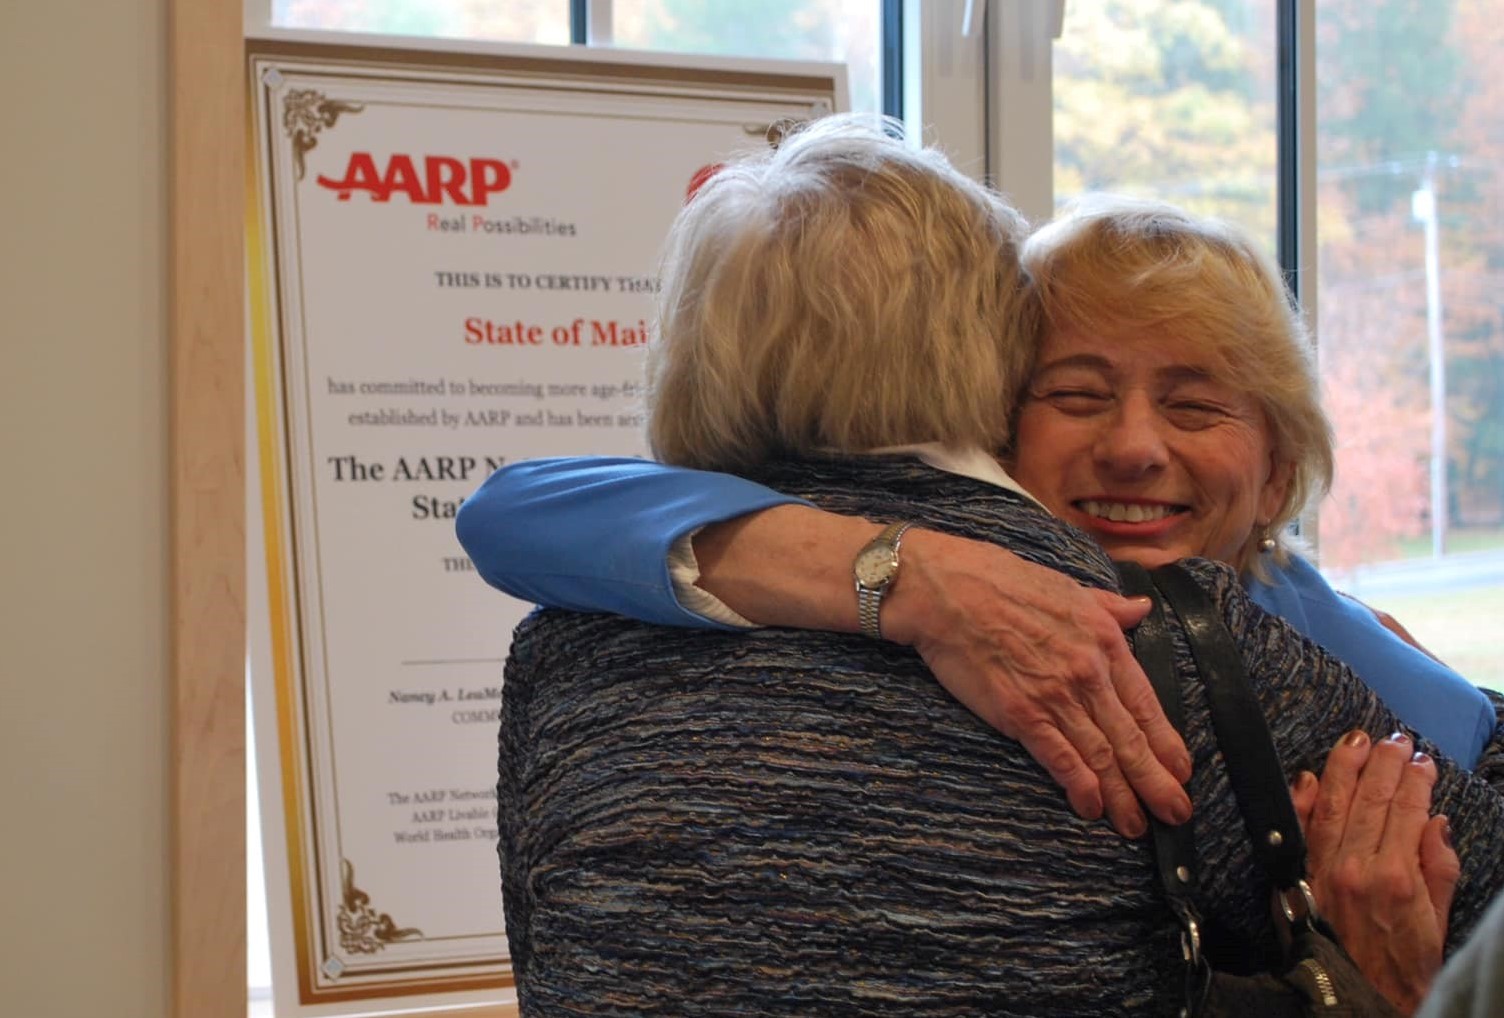 Governor Janet Mills hugging a person at an AARP event, 2019.